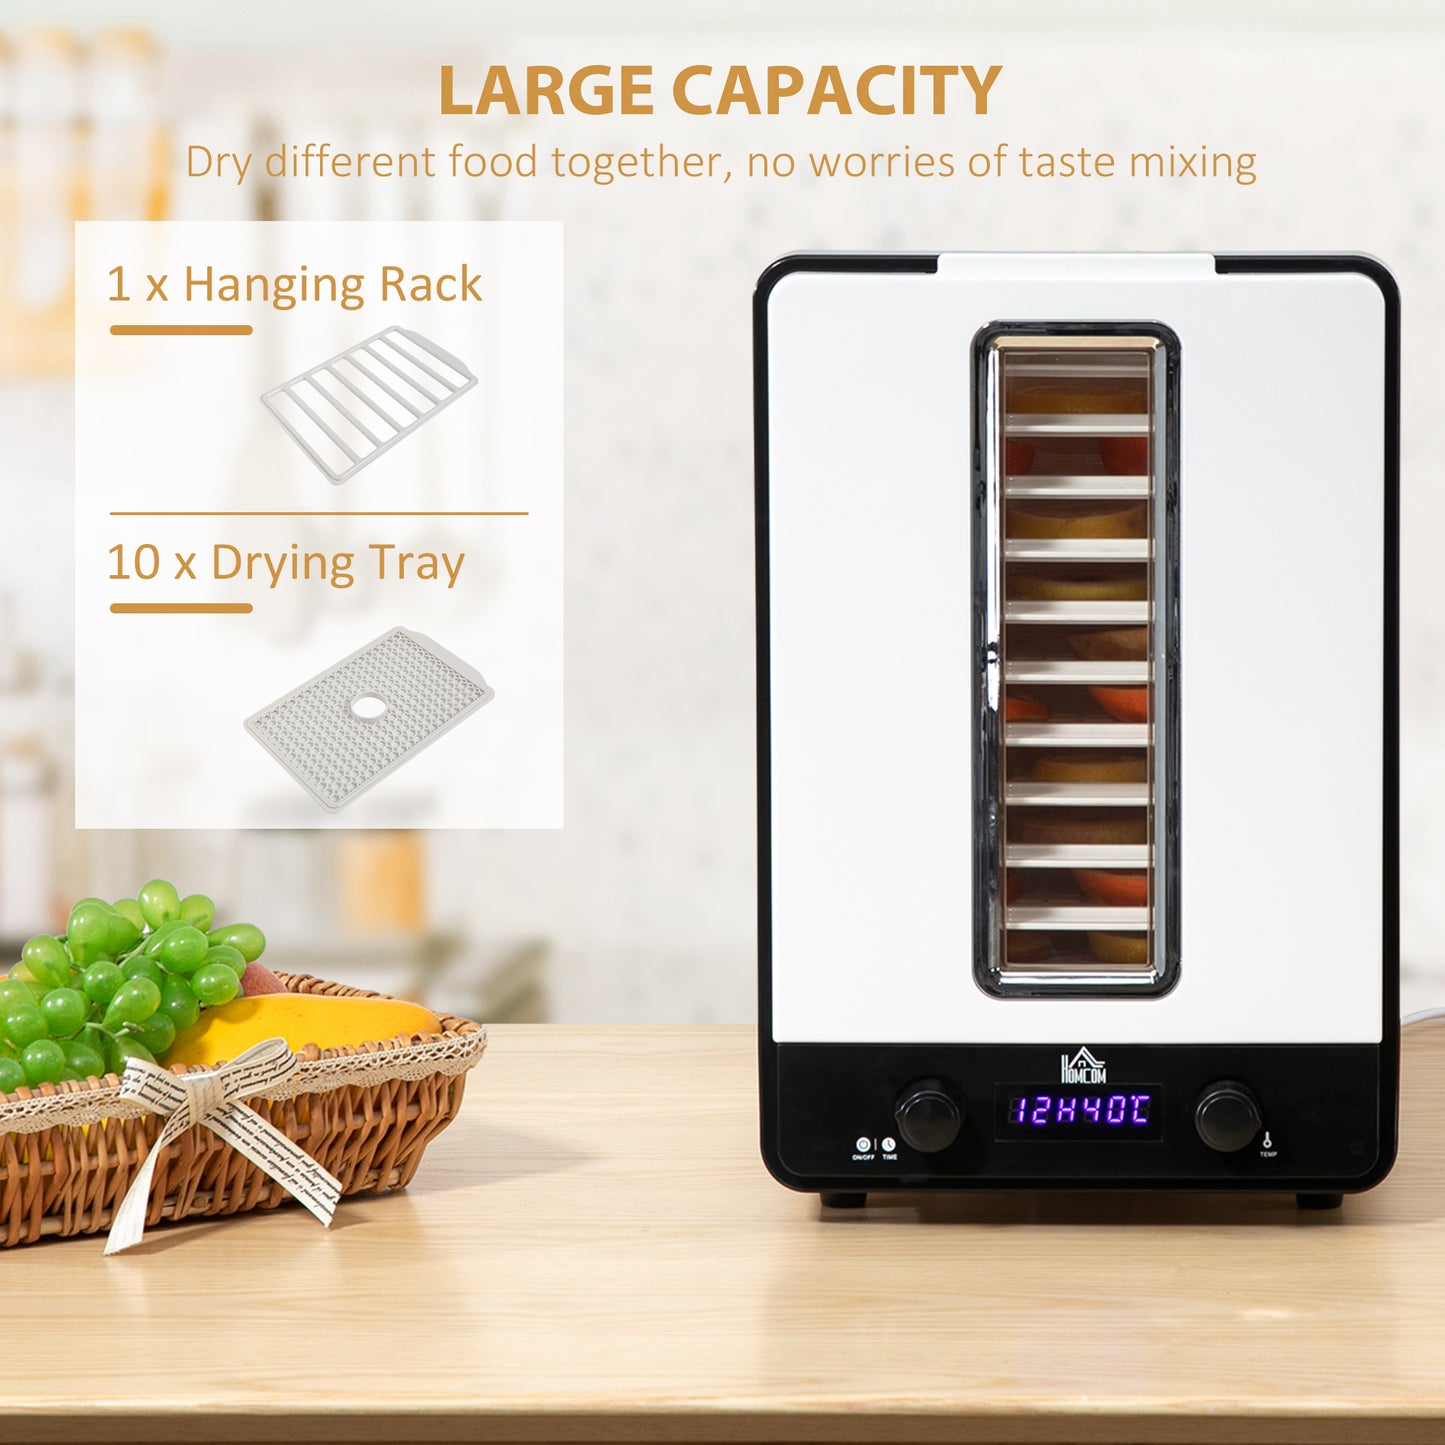 HOMCOM 11 Tier Food Dehydrator, 550W Food Dryer Machine with Adjustable Temperature, Timer and LCD Display for Drying Fruit, Meat, Vegetable, Jerky and Pet Treat, White